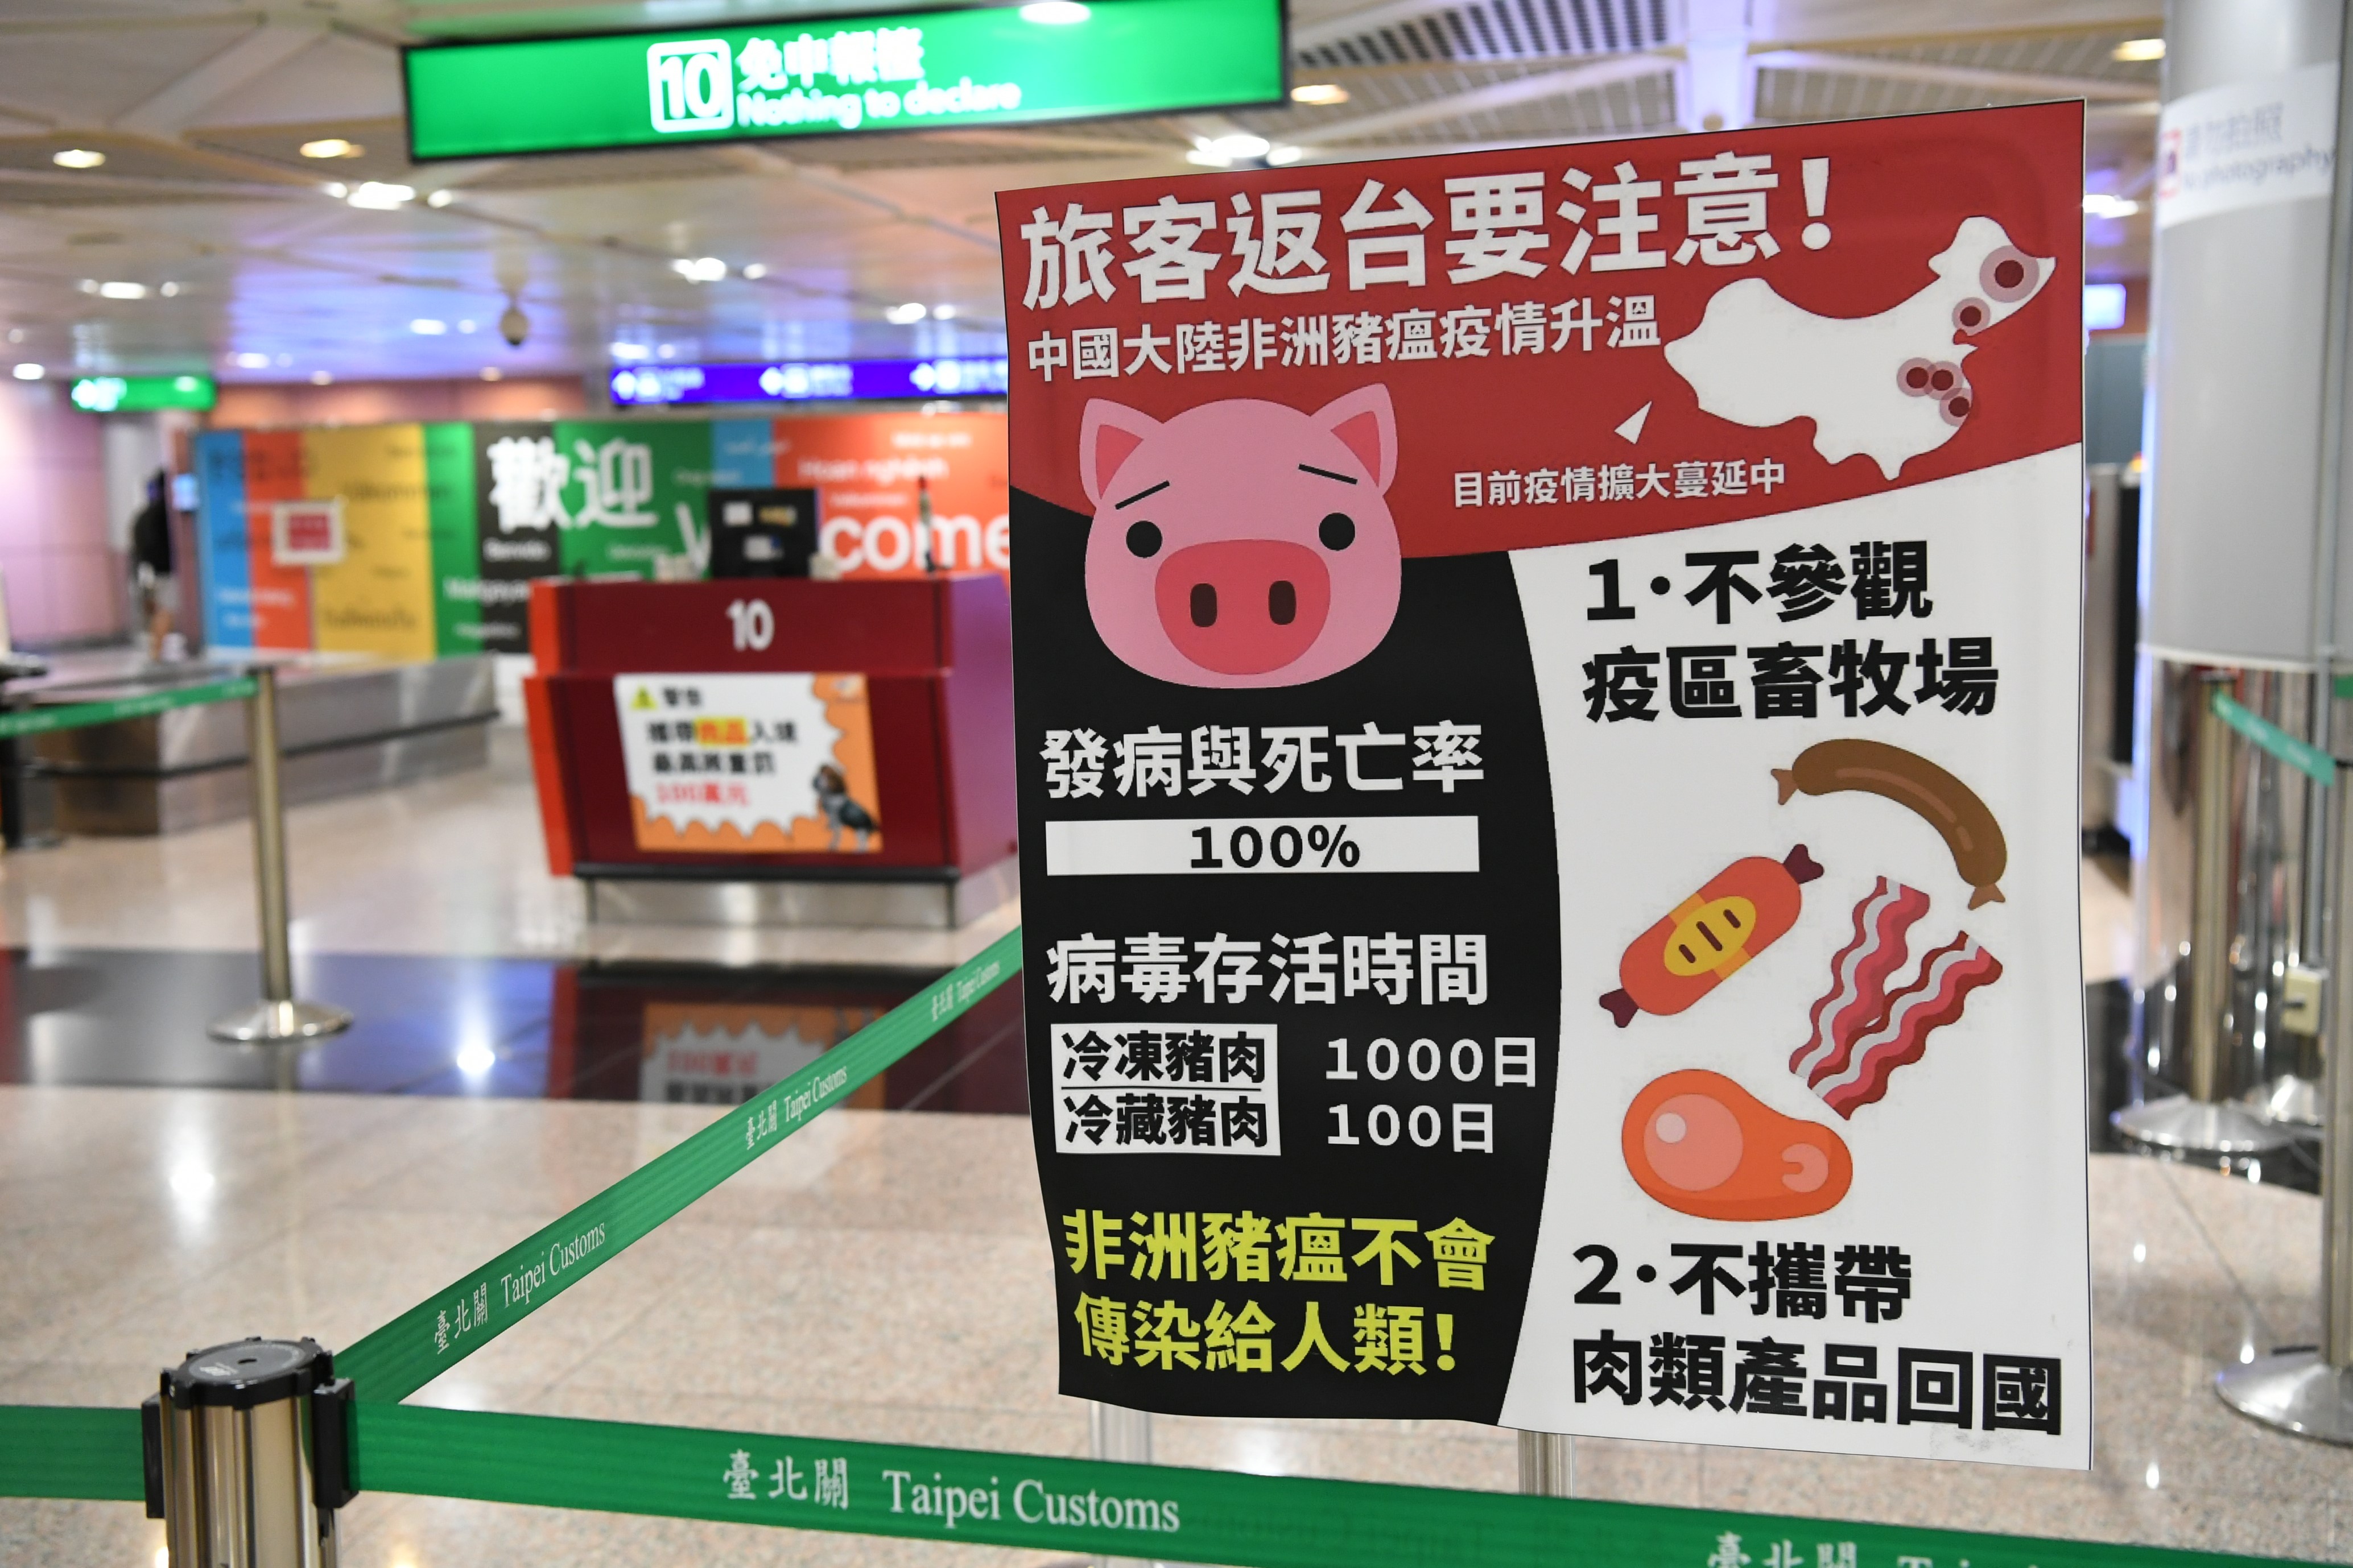 For the first time, Taiwan seized meat products smuggled from Vietnam into the country. Photo/Retrieved from "Central News Agency"